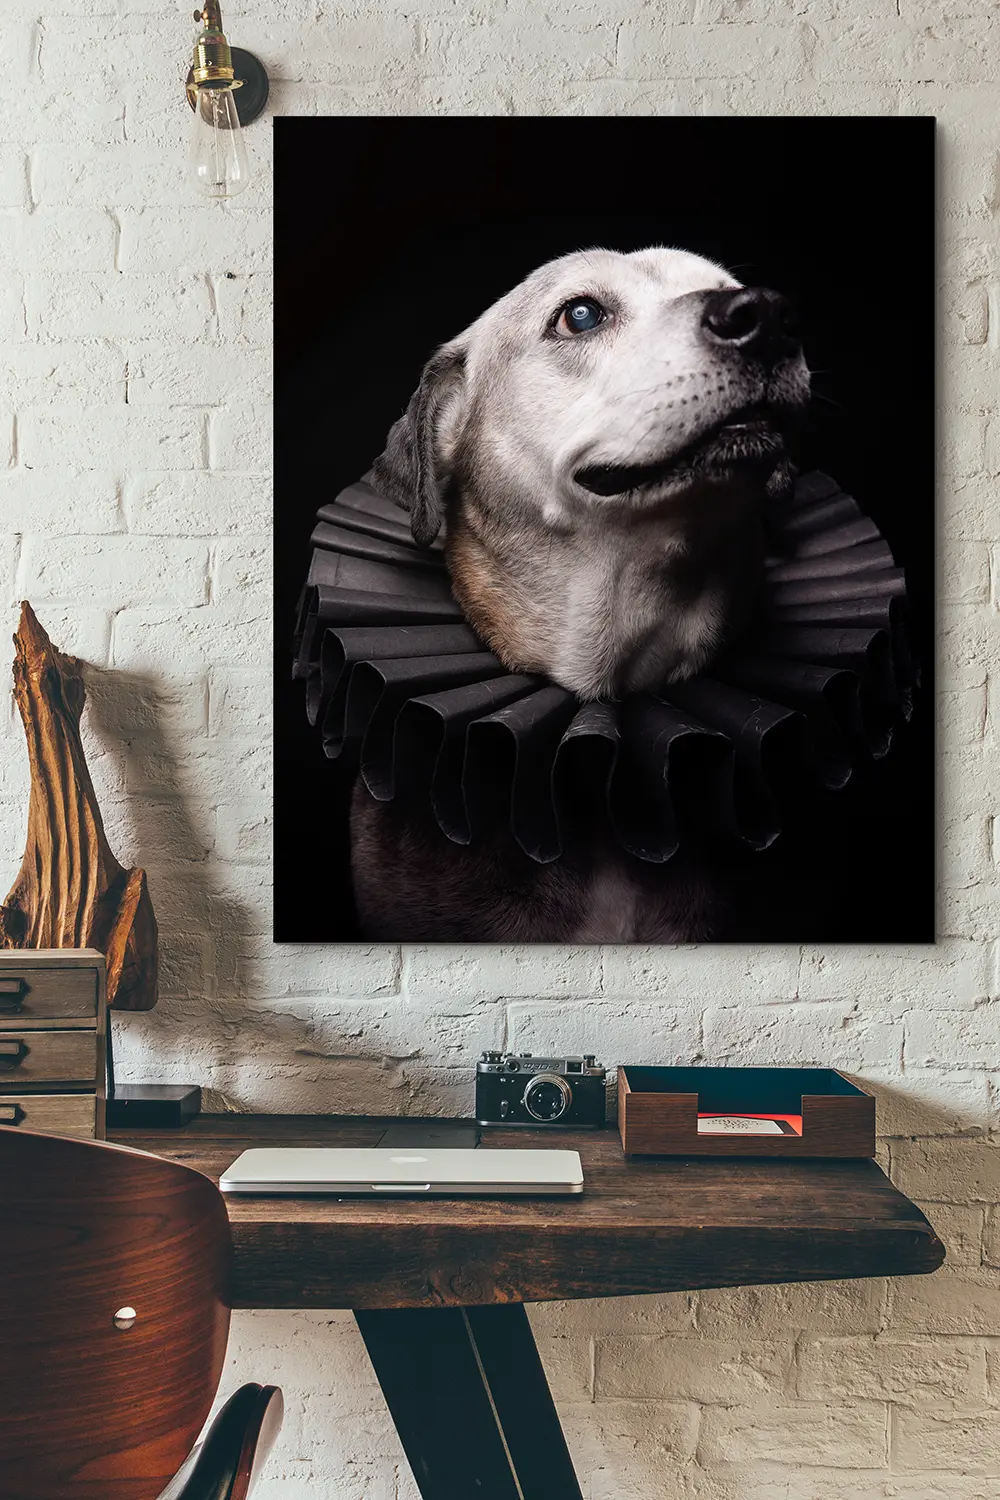 Photographic portrait of a senior Staffordshire Pit Bull Terrier wearing a black Elizabethan ruff collar take a the Puptrait Studio in Baltimore, MD